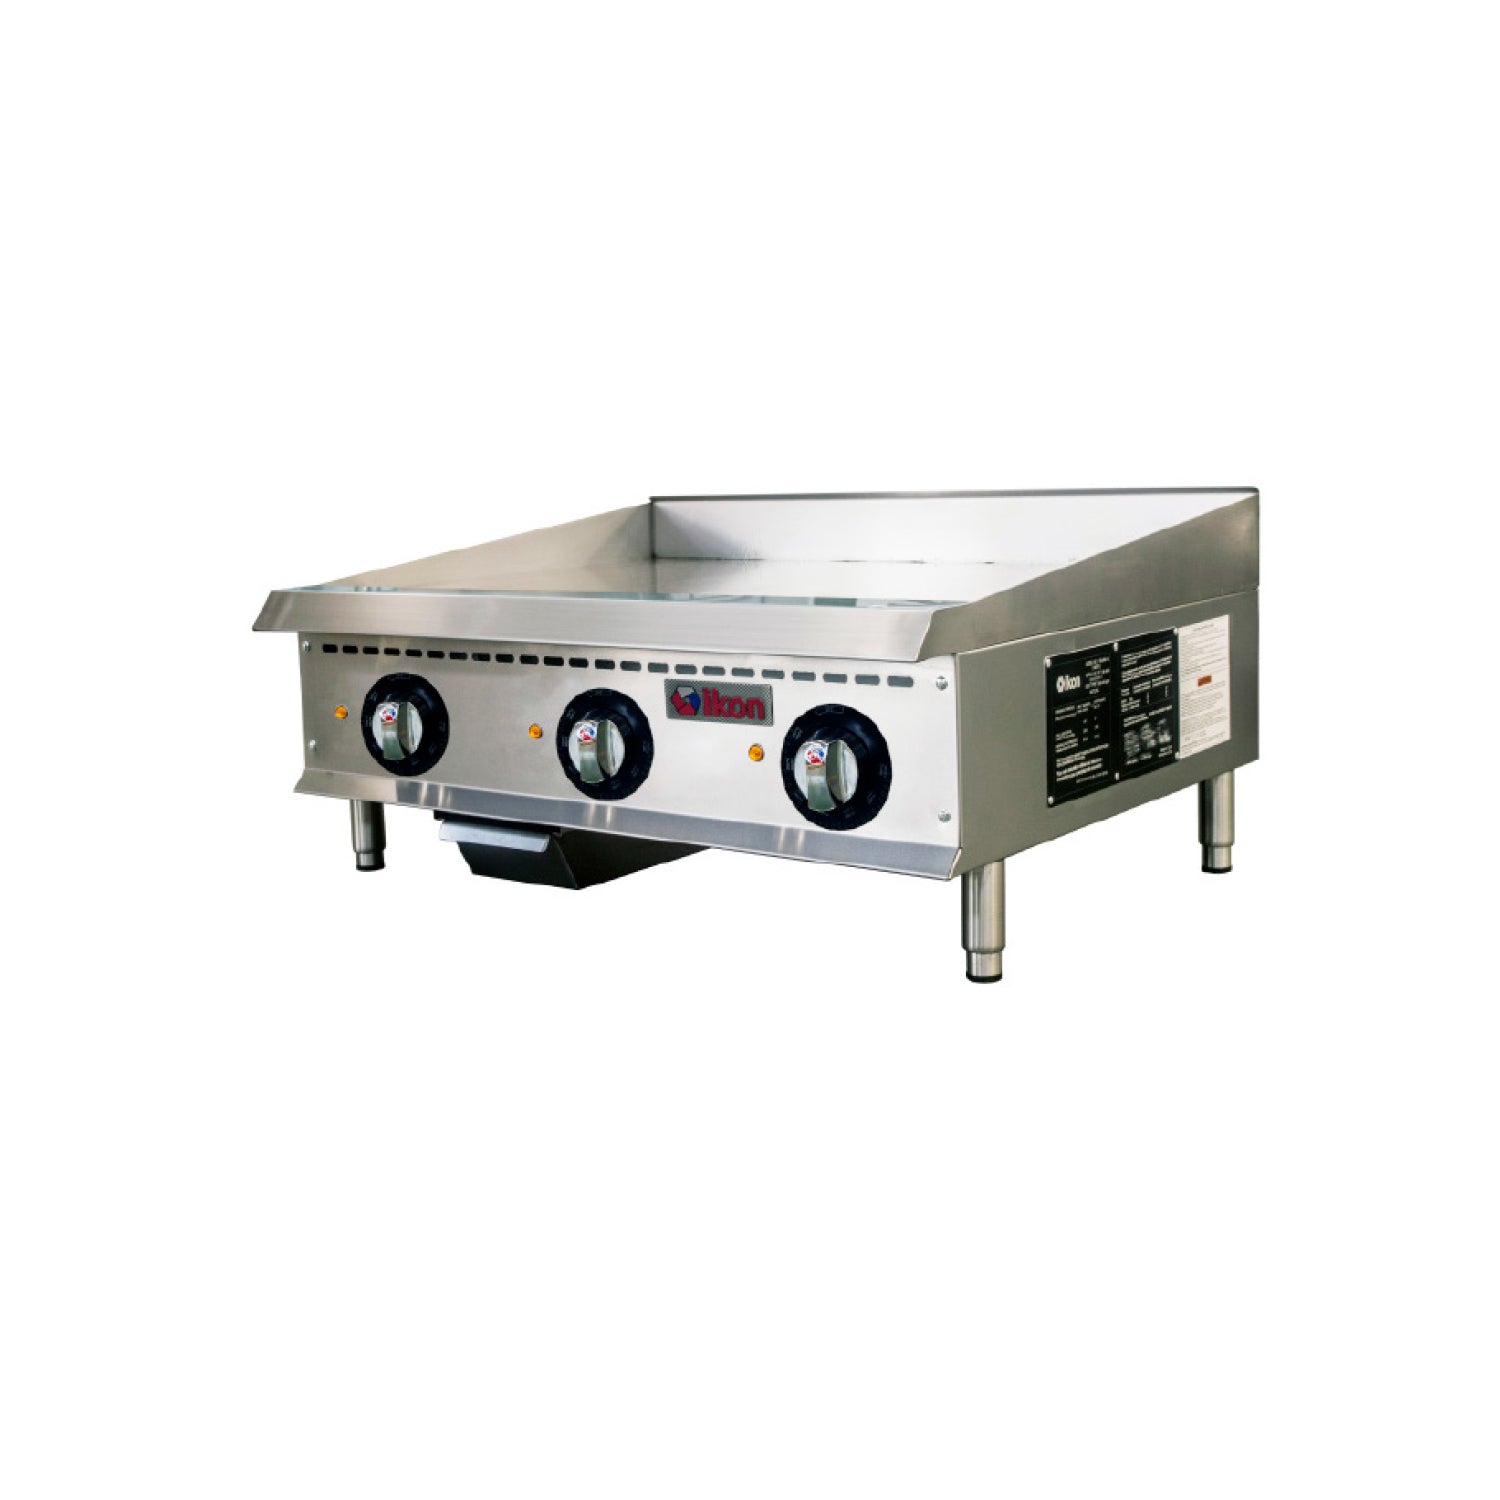 IKON - ITG-36E, 36" Electric Griddles With 12.0 KW Power